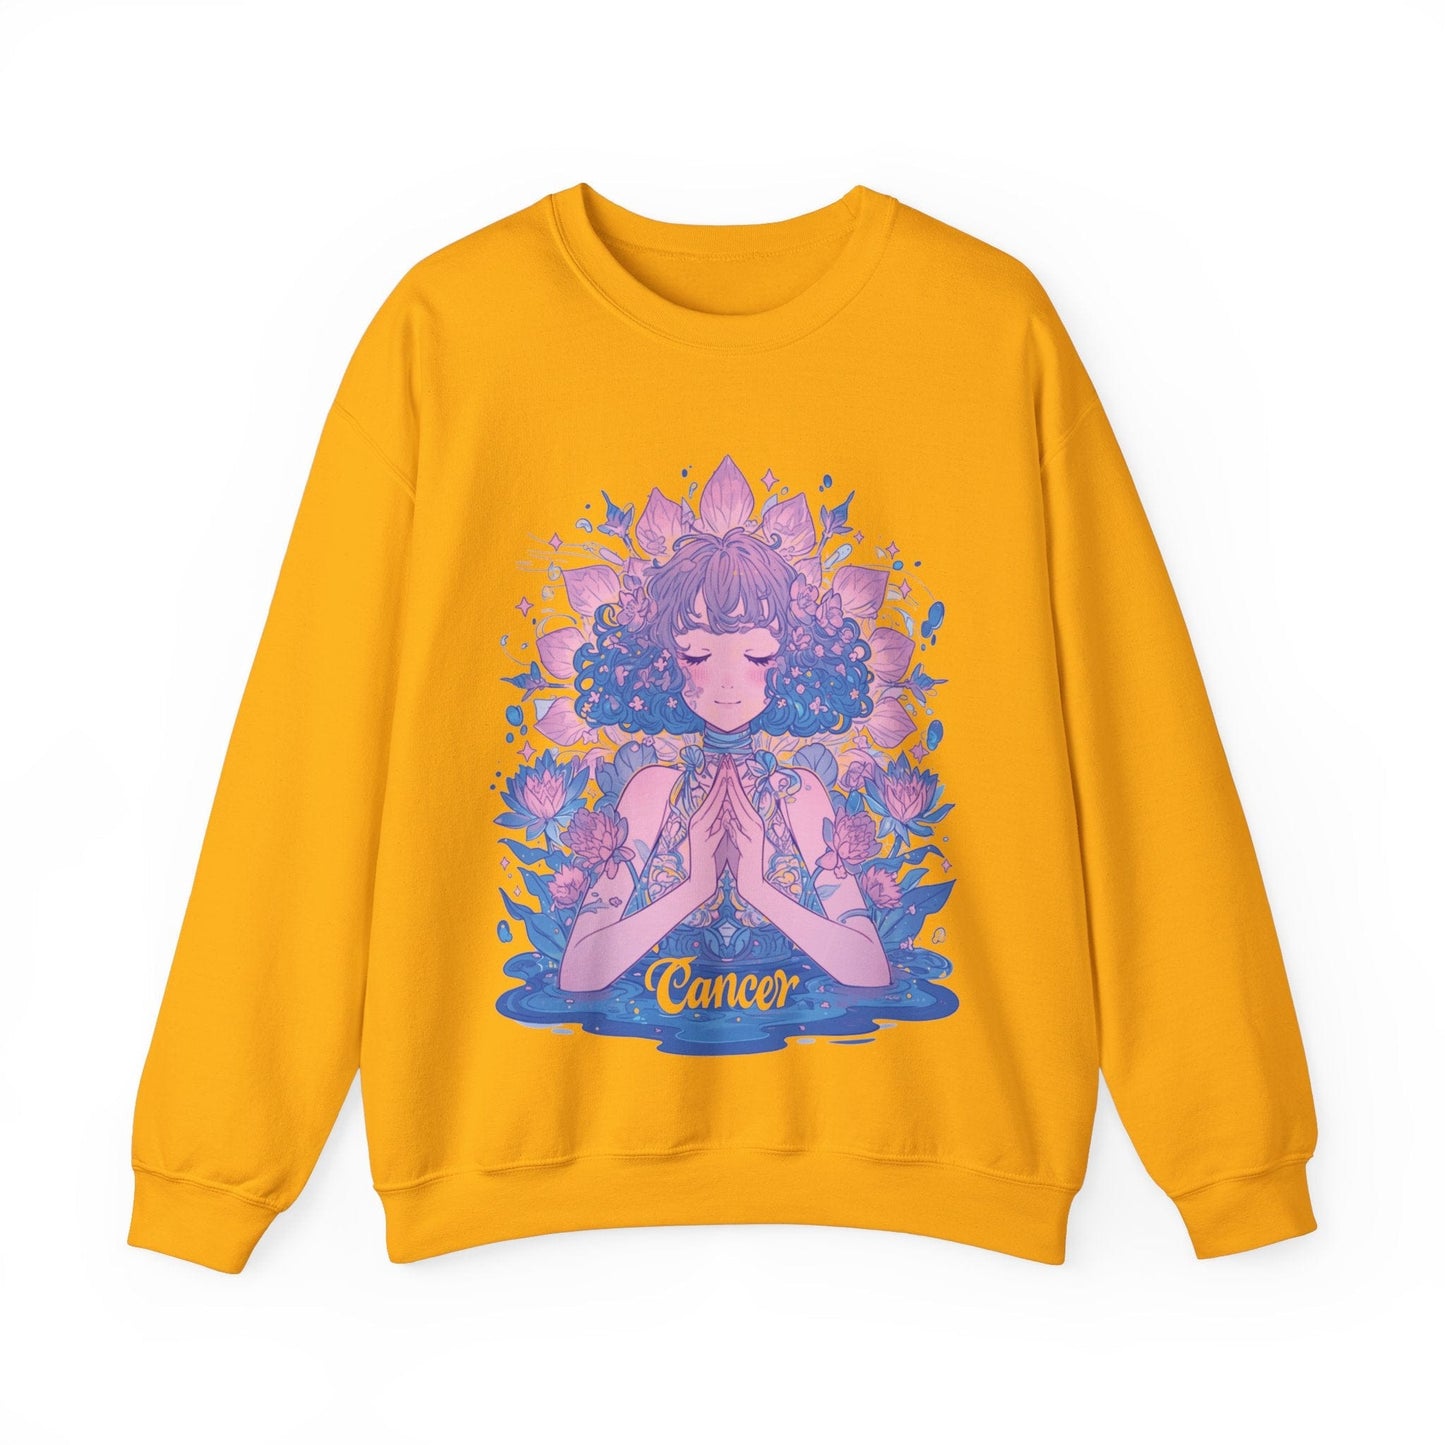 Sweatshirt S / Gold Lunar Bloom Cancer Sweater: Embrace Tranquility